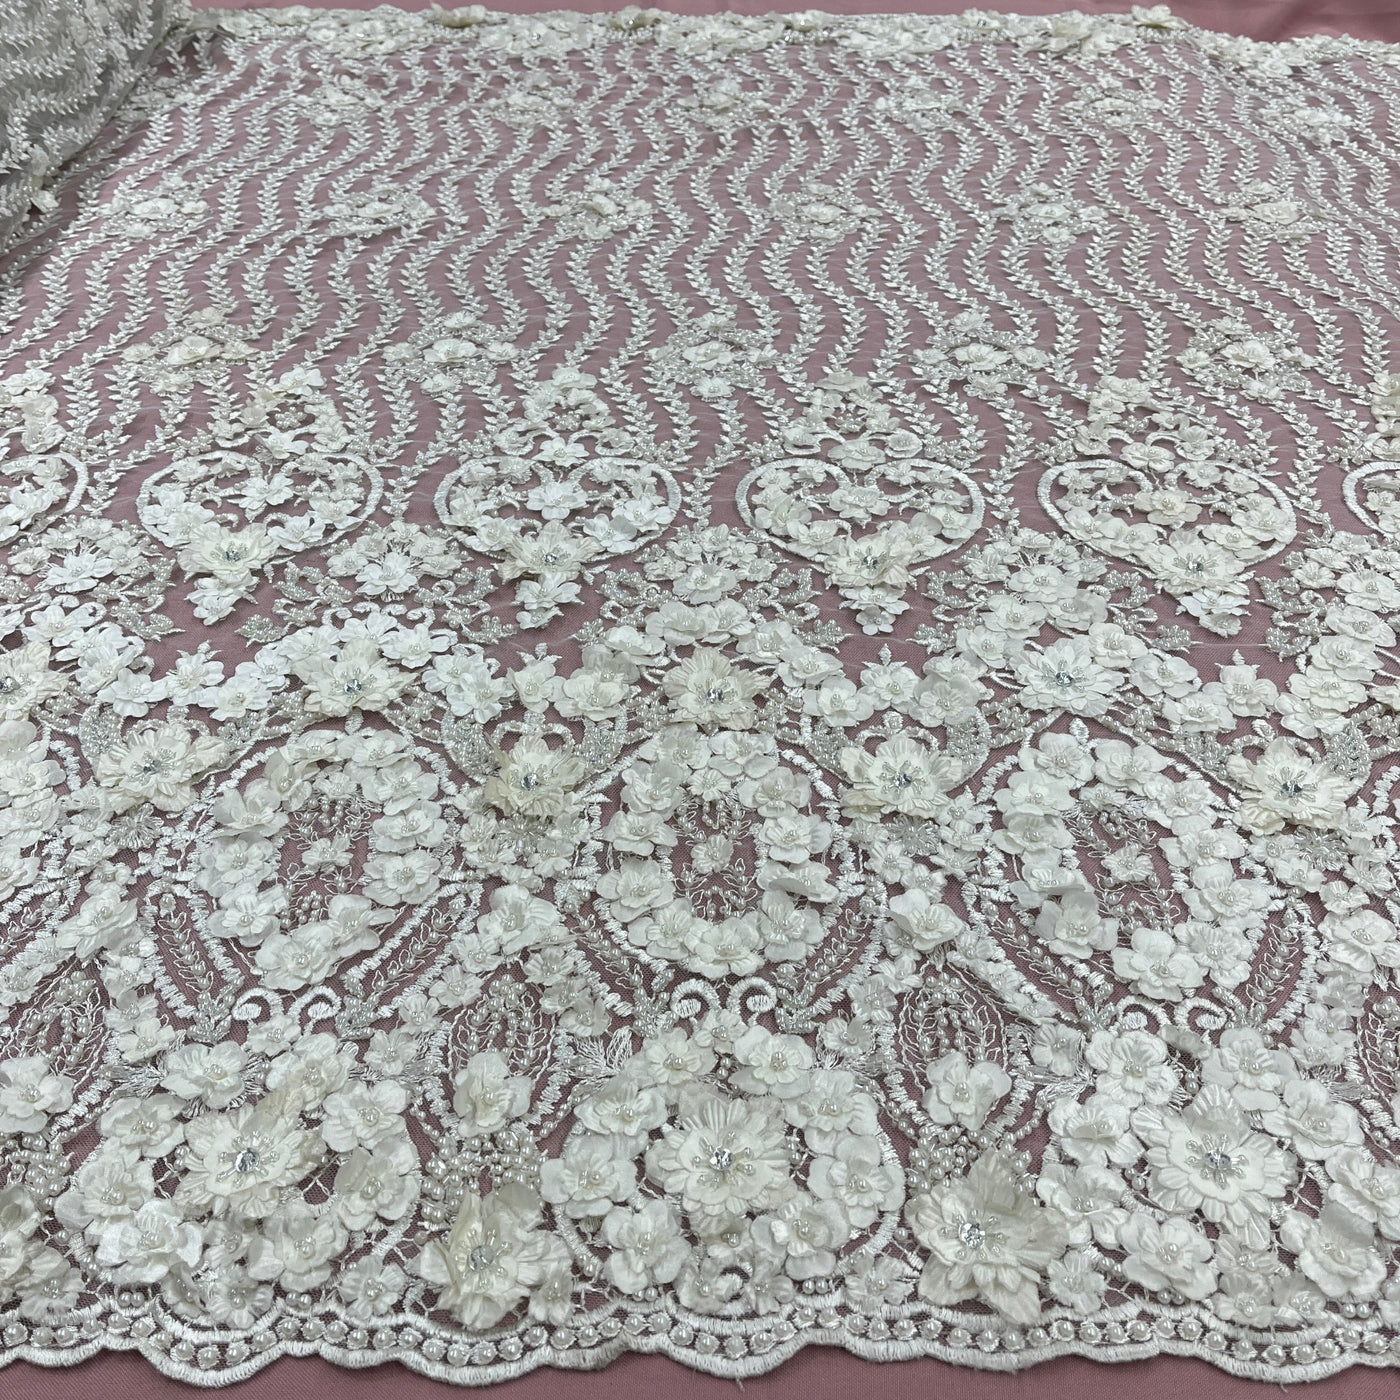 Beaded 3D Floral Lace Fabric Embroidered on 100% Polyester Net Mesh | Lace USA - GD-363